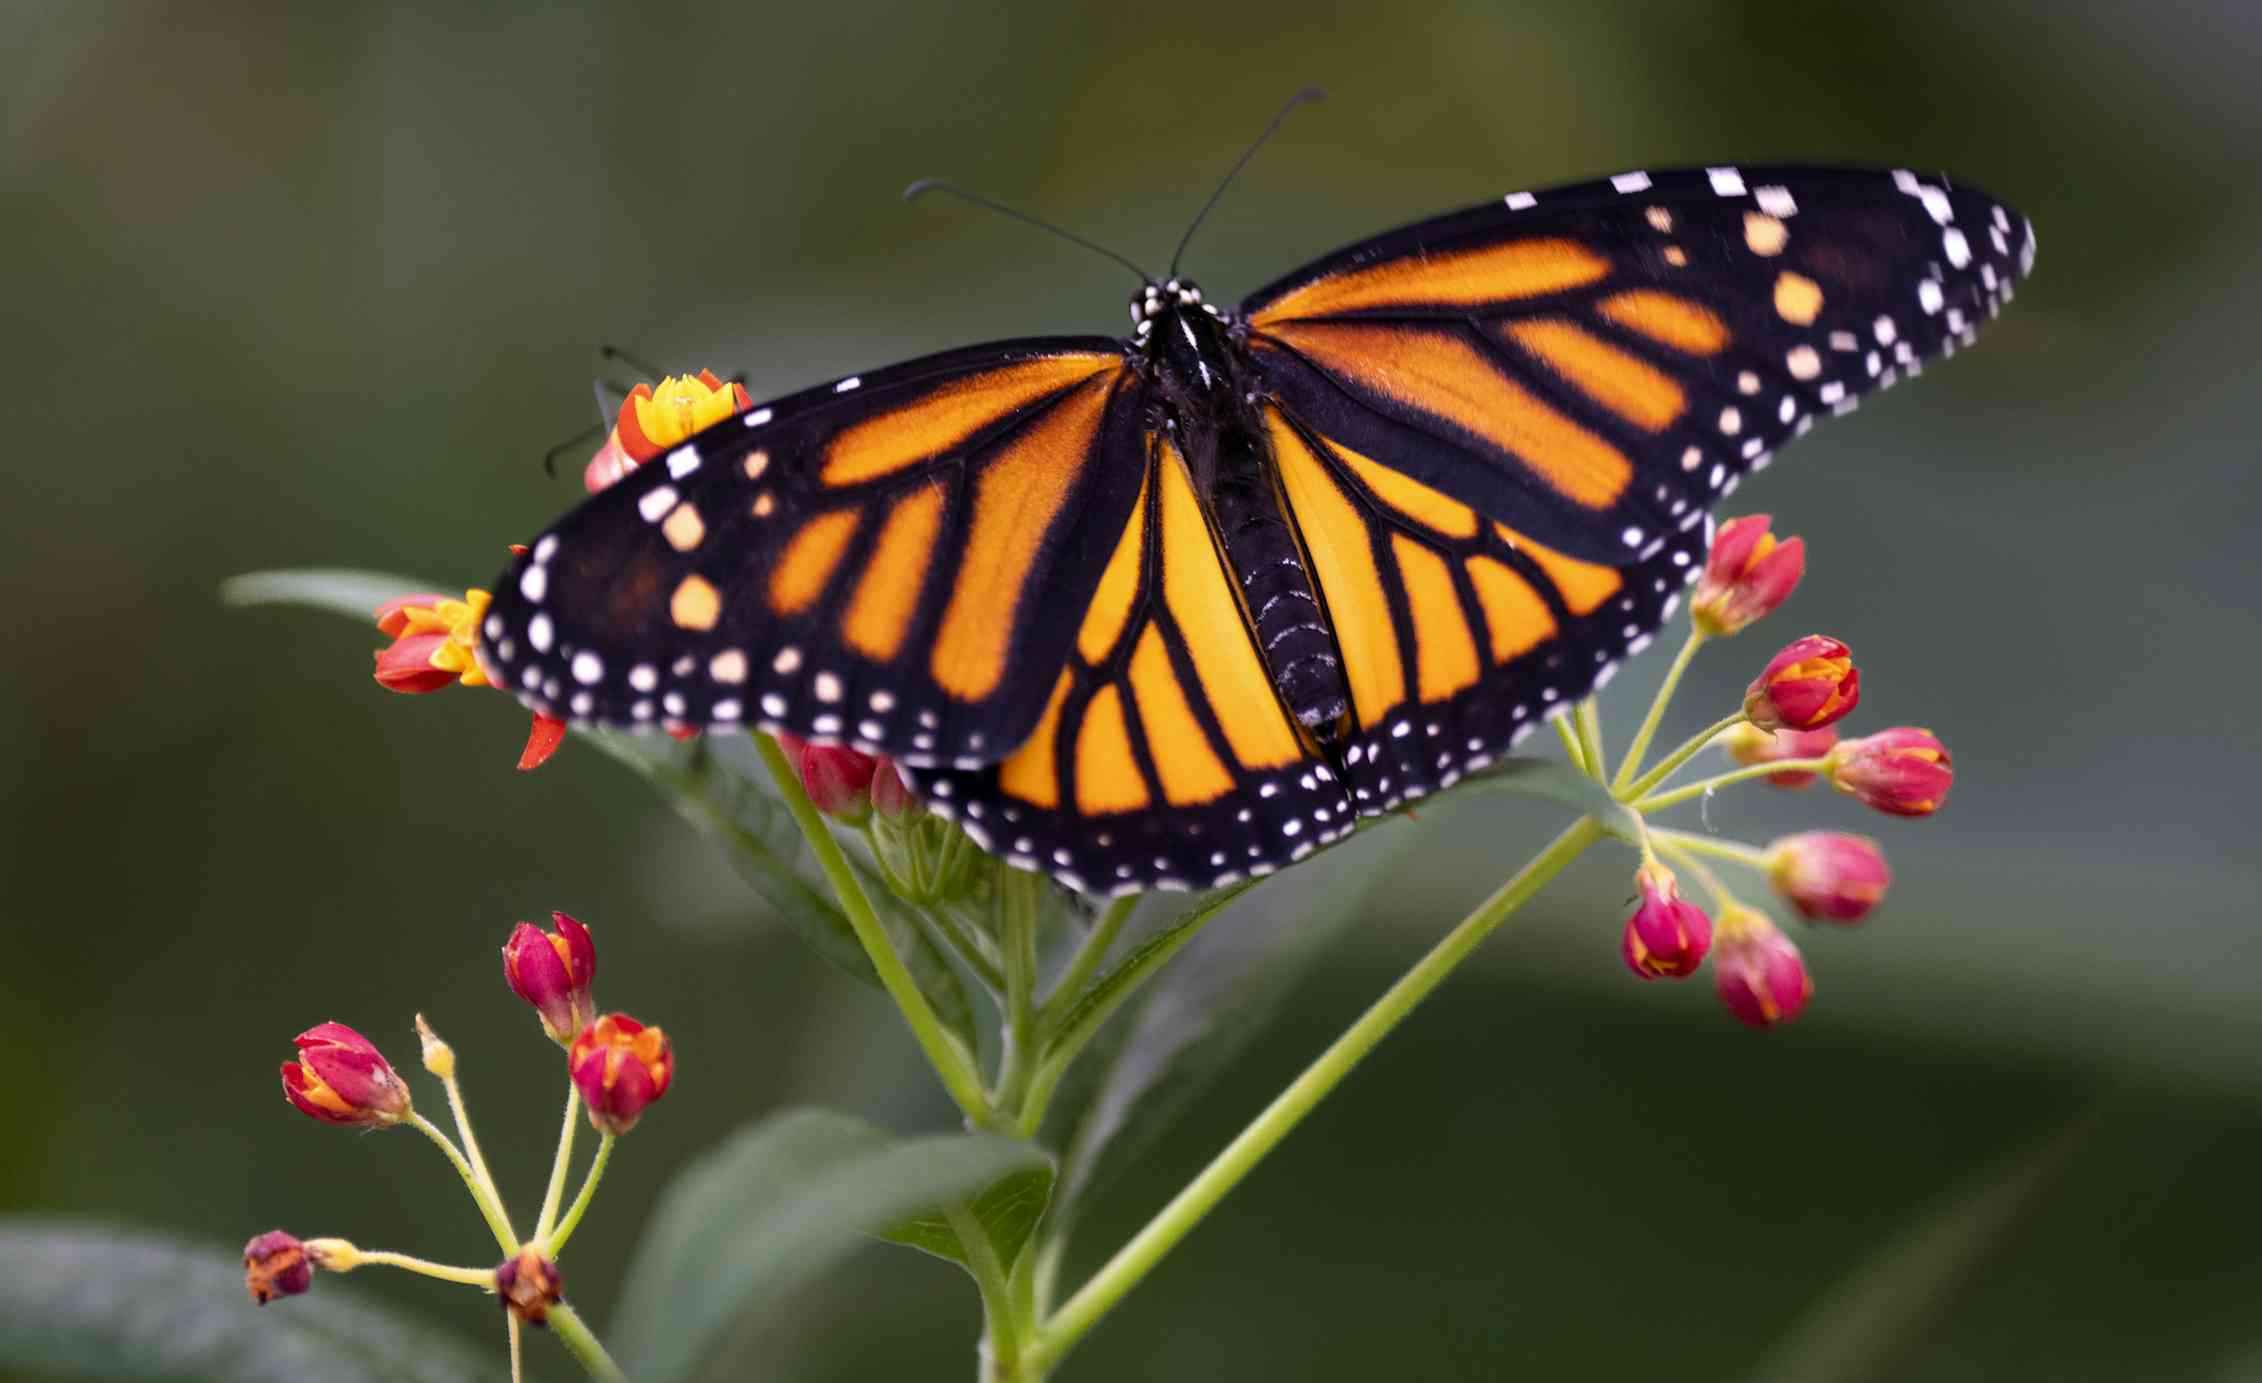 A monarch butterfly, with orange wings and black veins, spreads its wings on the stalk of a plant